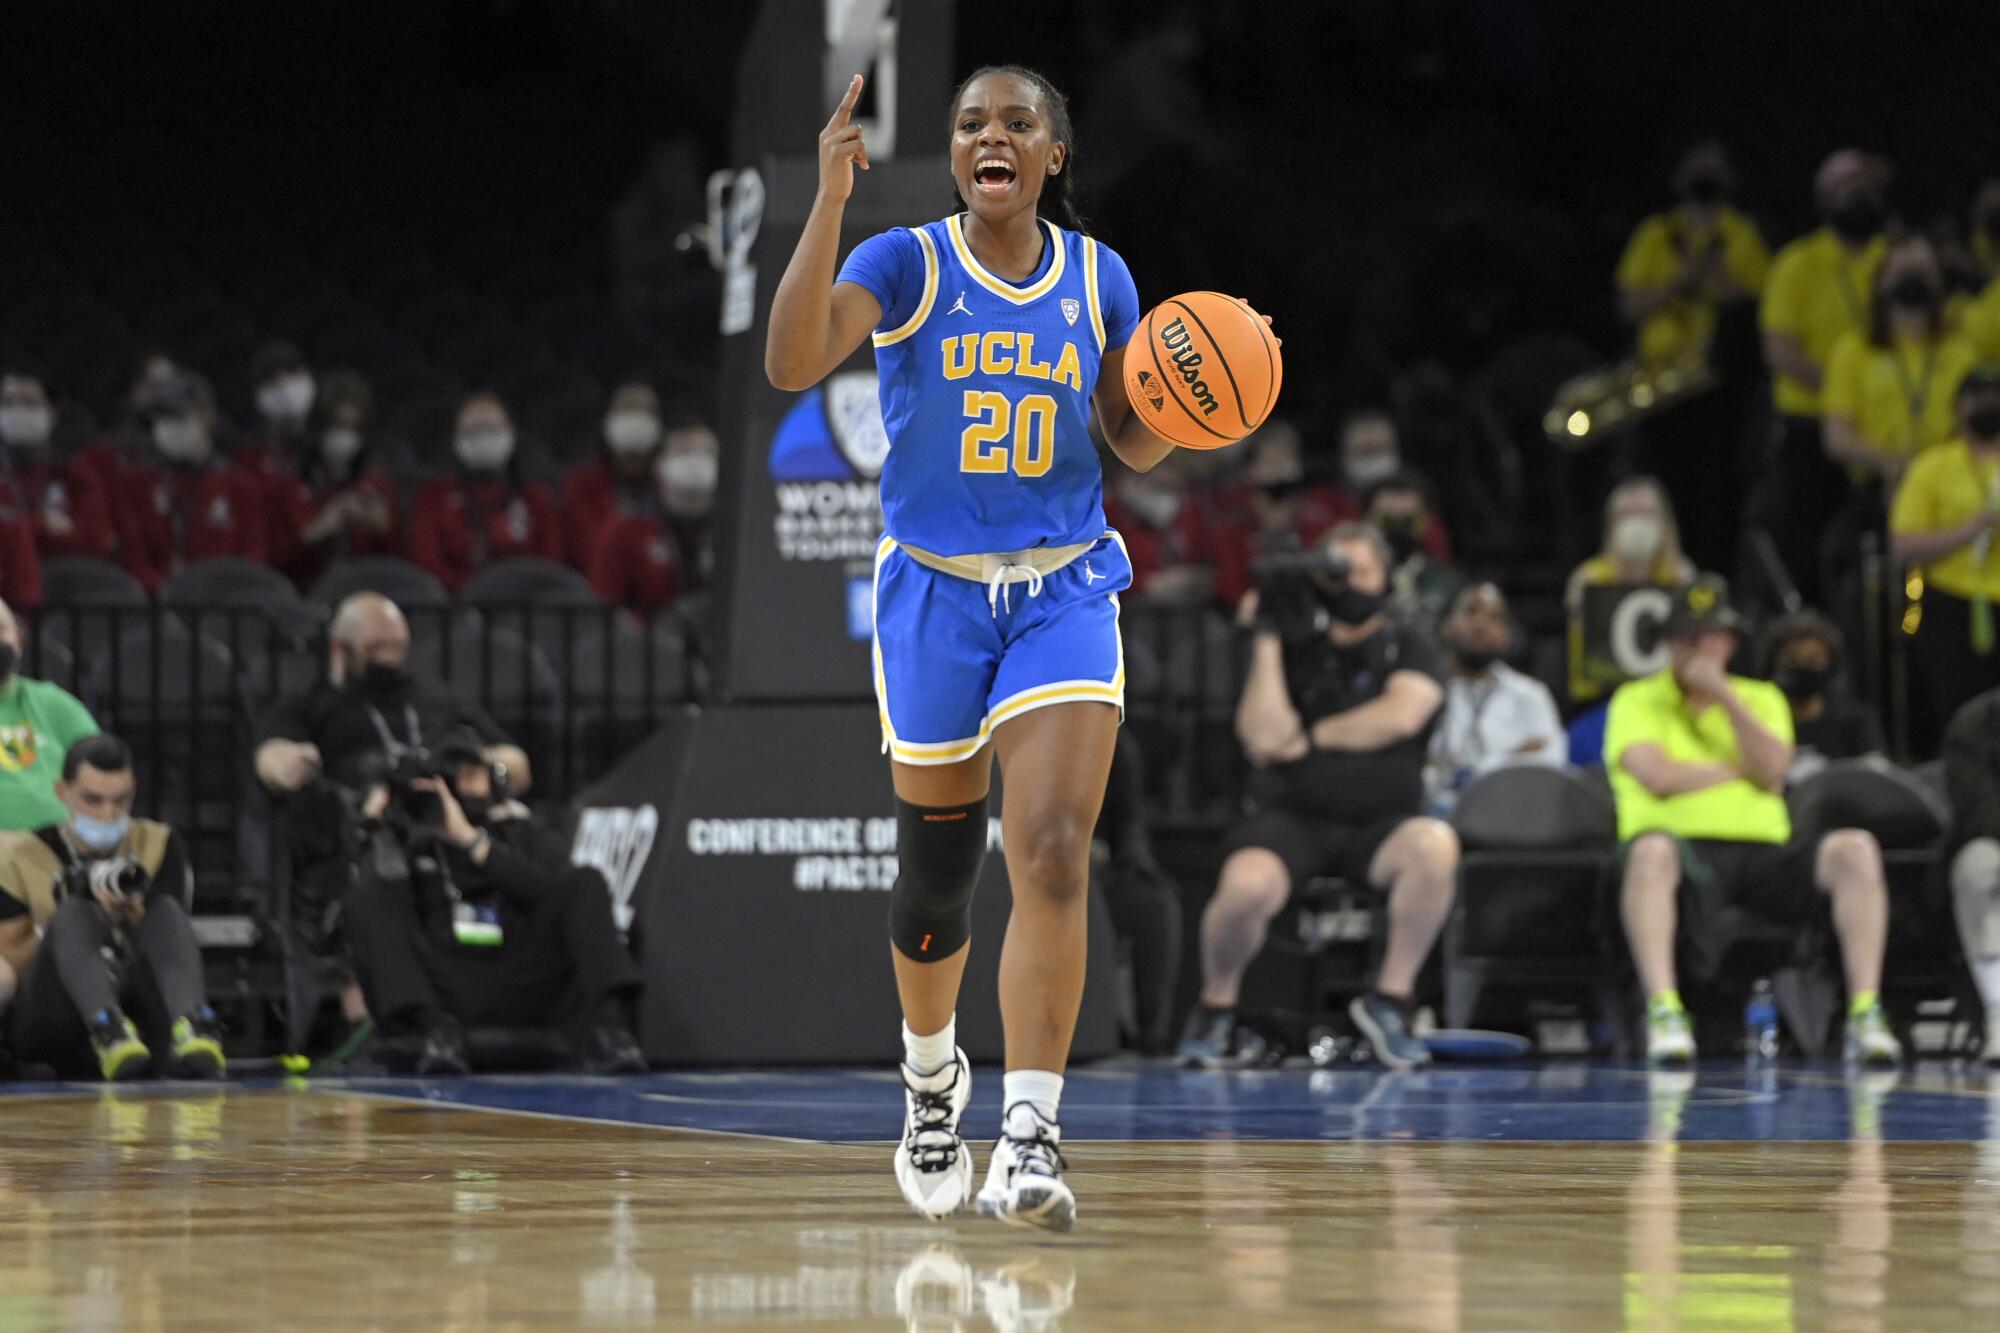 Charisma Osborne calls out a play for UCLA.